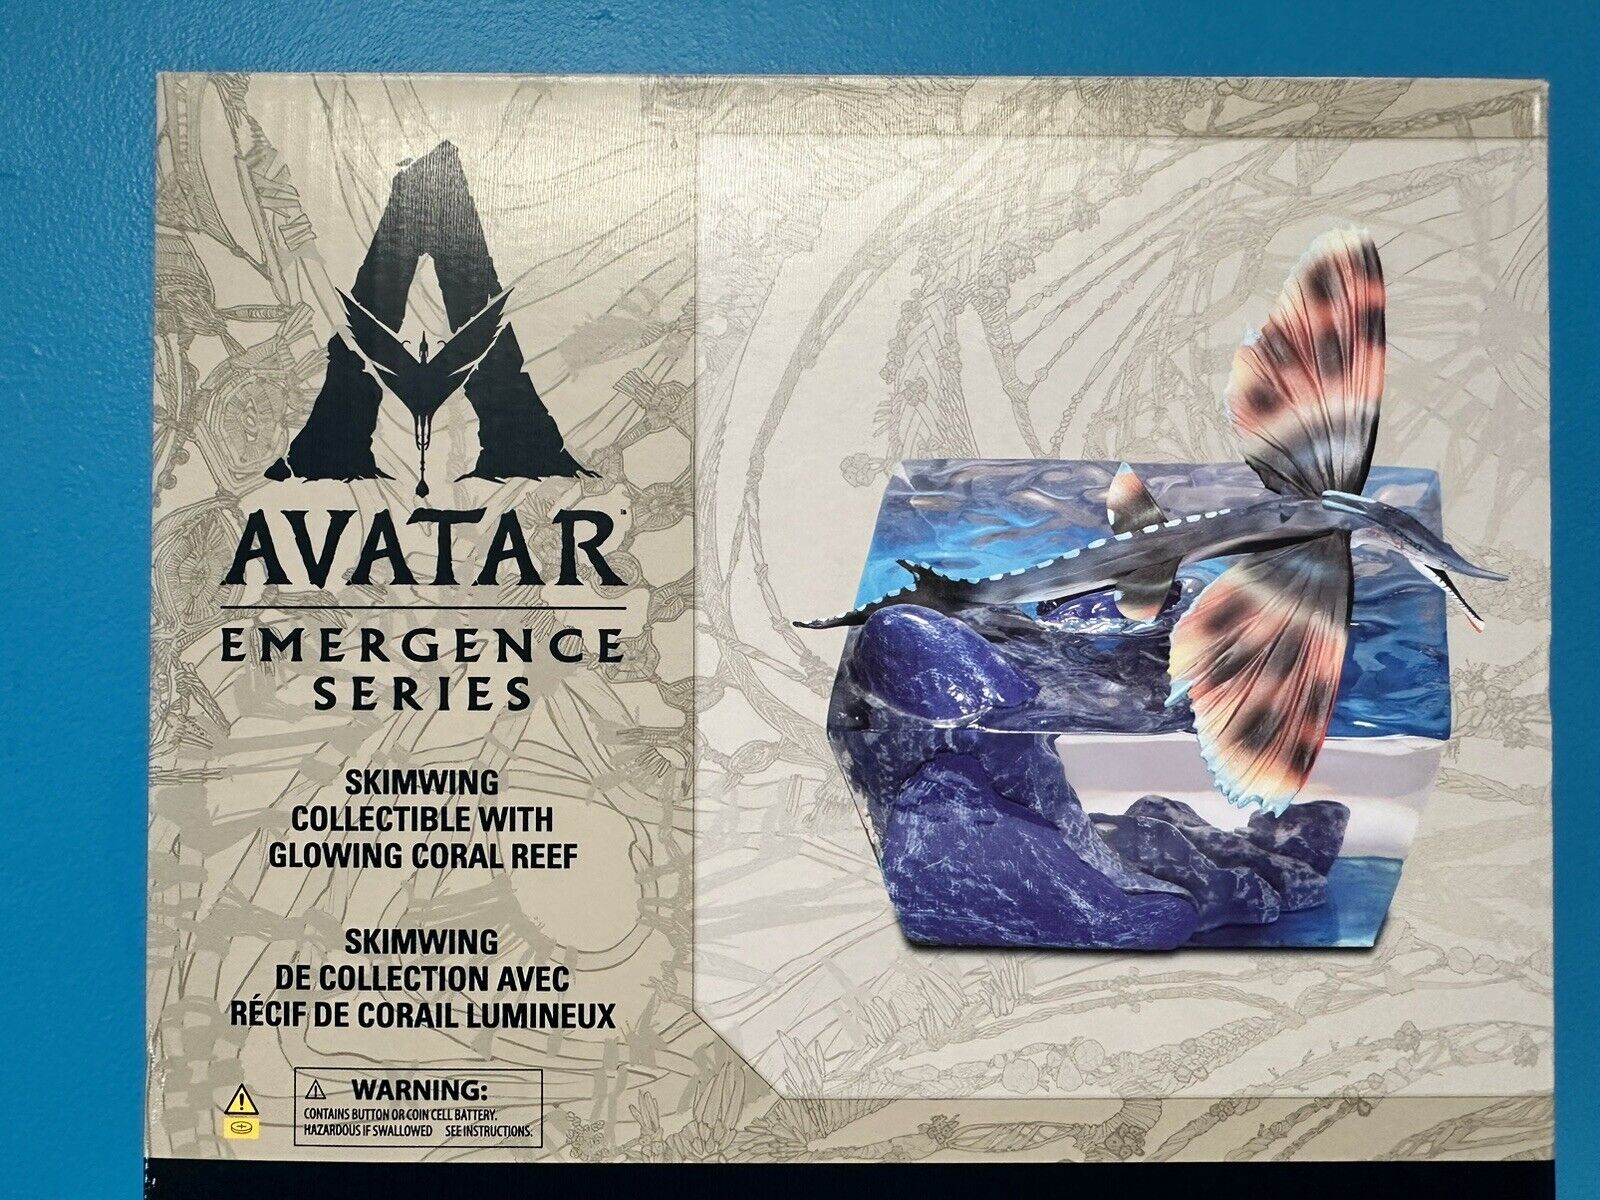 Disney Avatar: The Way of Water - Skimwing Collectible with Glowing Coral Reef